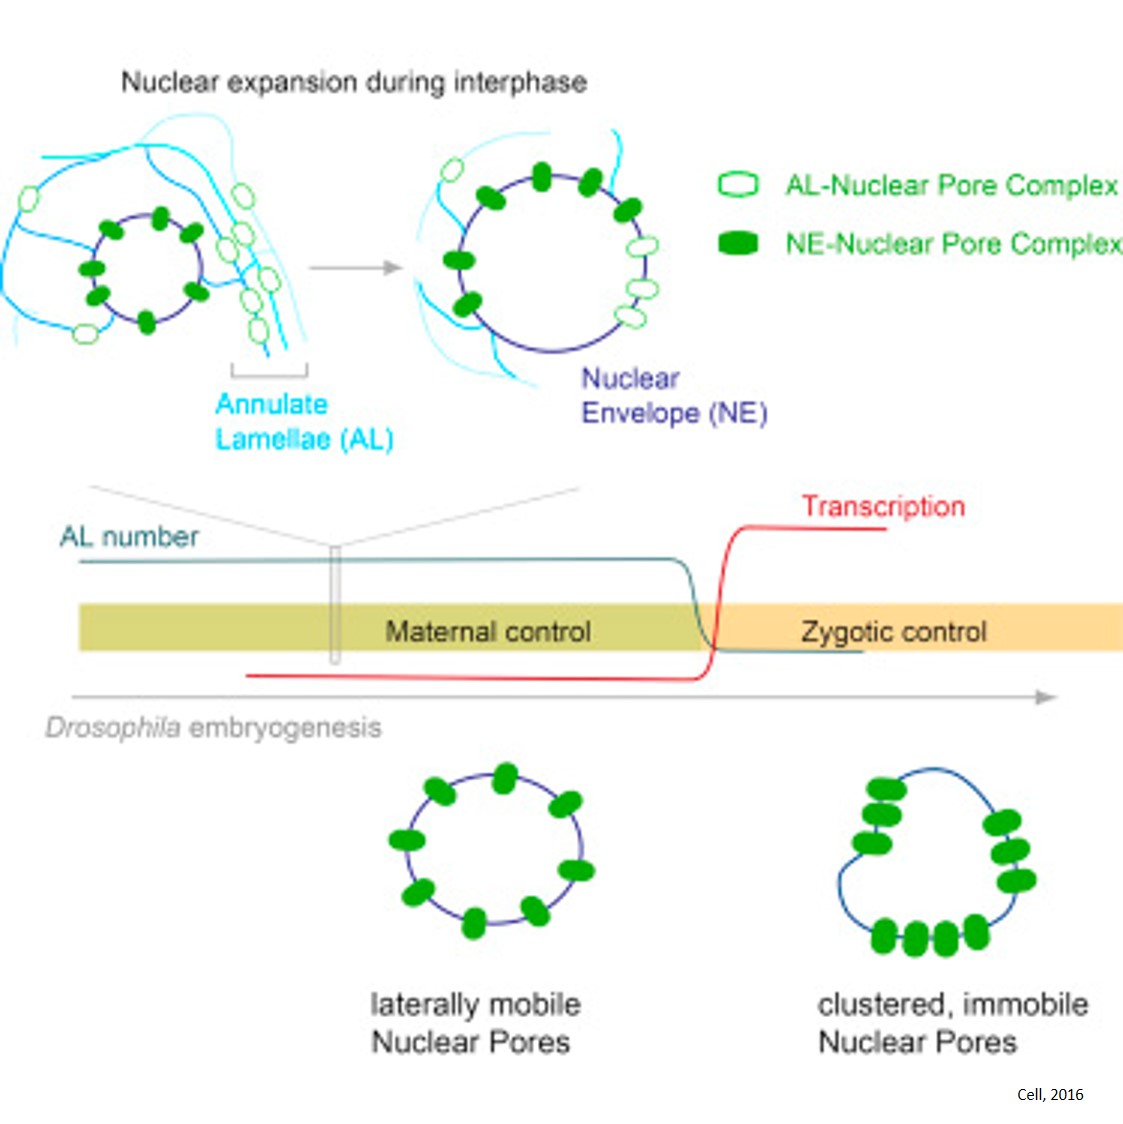 Pre-assembled Nuclear Pores Insert into the Nuclear Envelope during Early Development